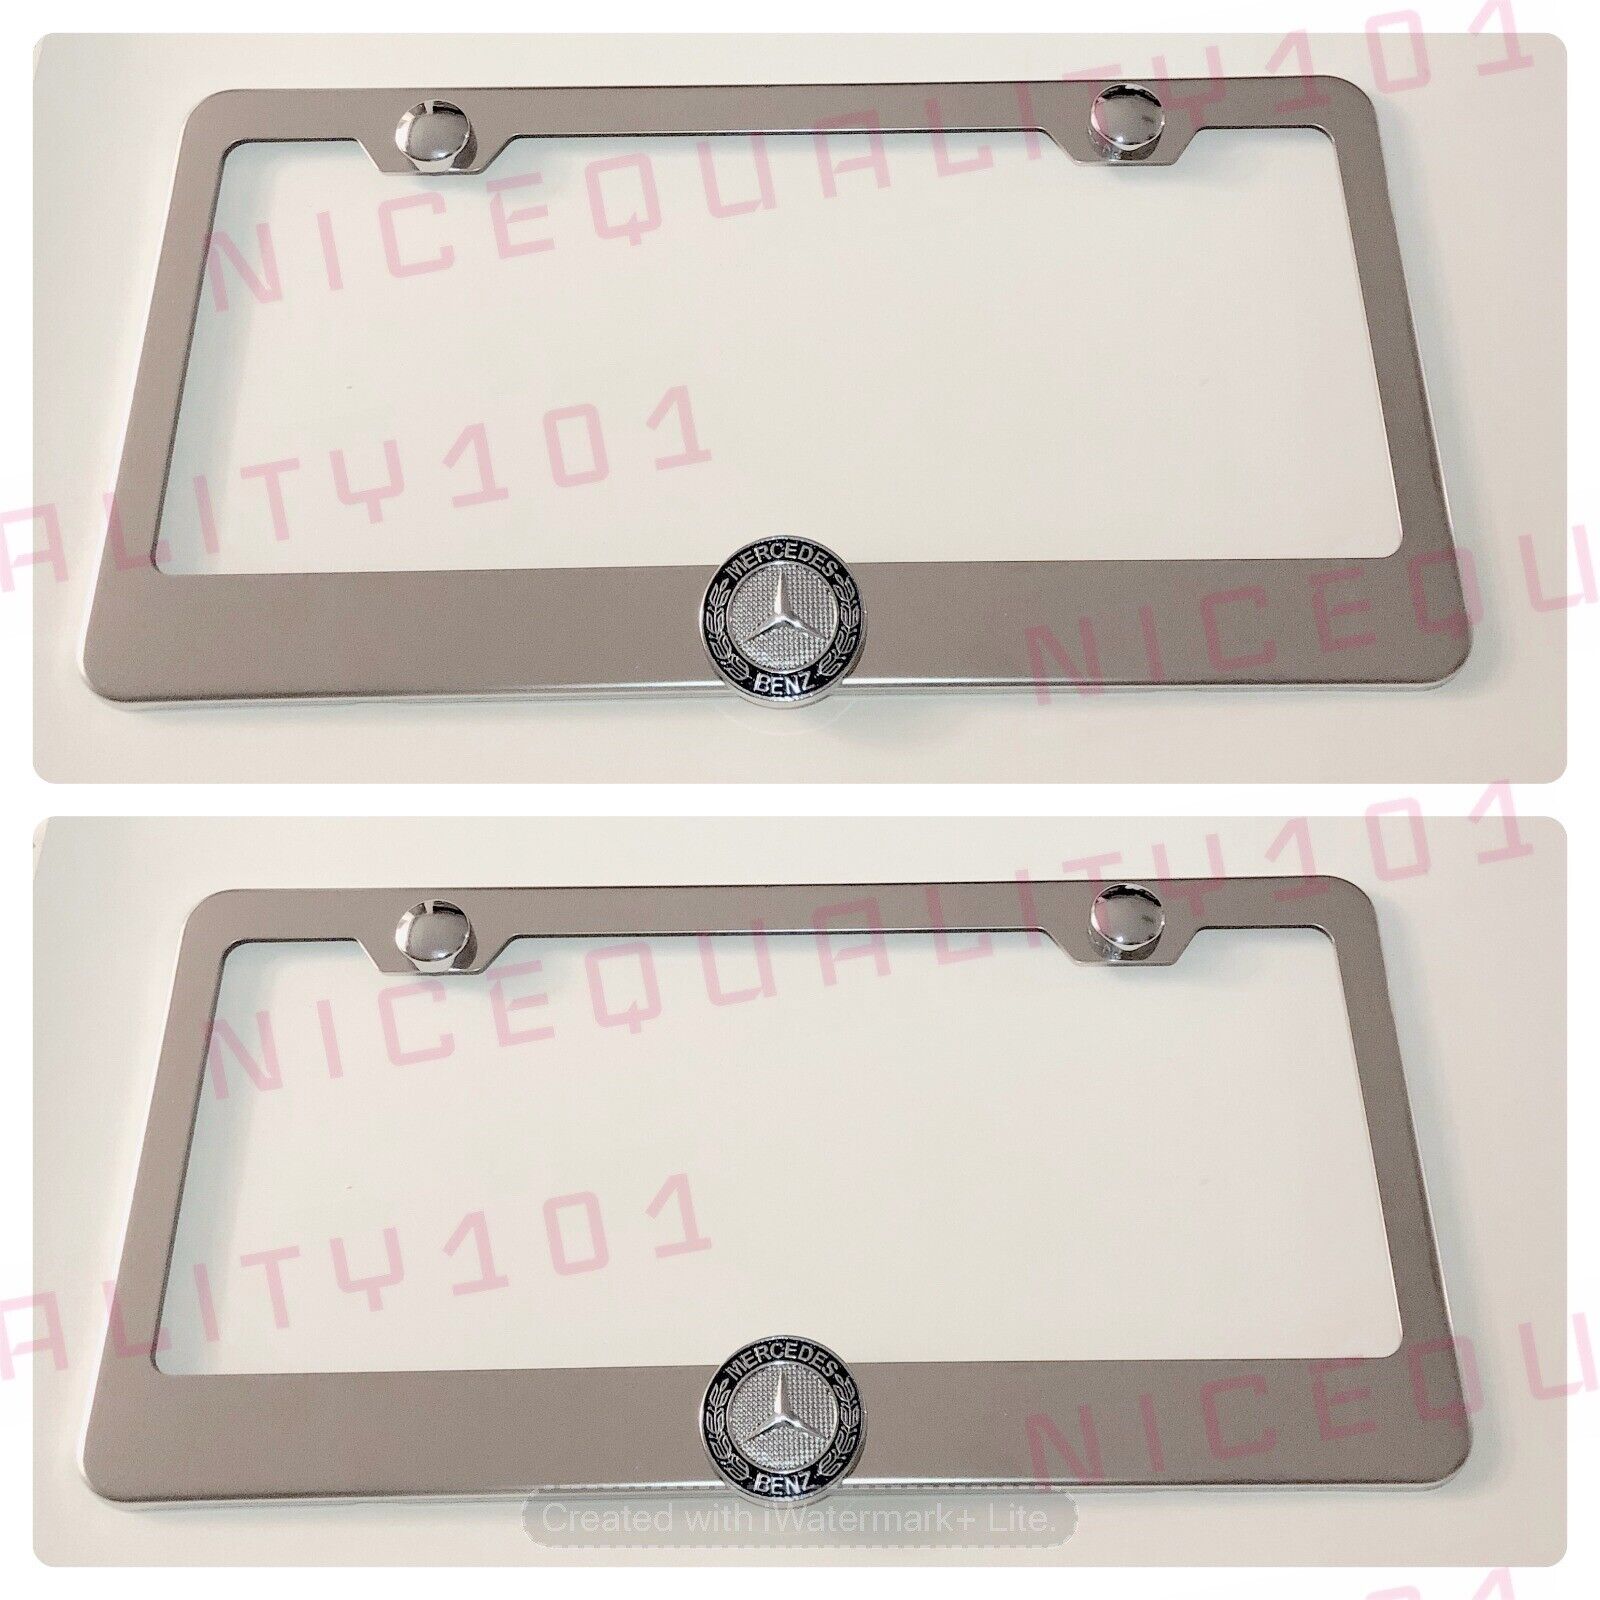 2x 3D Mercedes Benz Stainless Steel Chrome Finished License Plate Frame